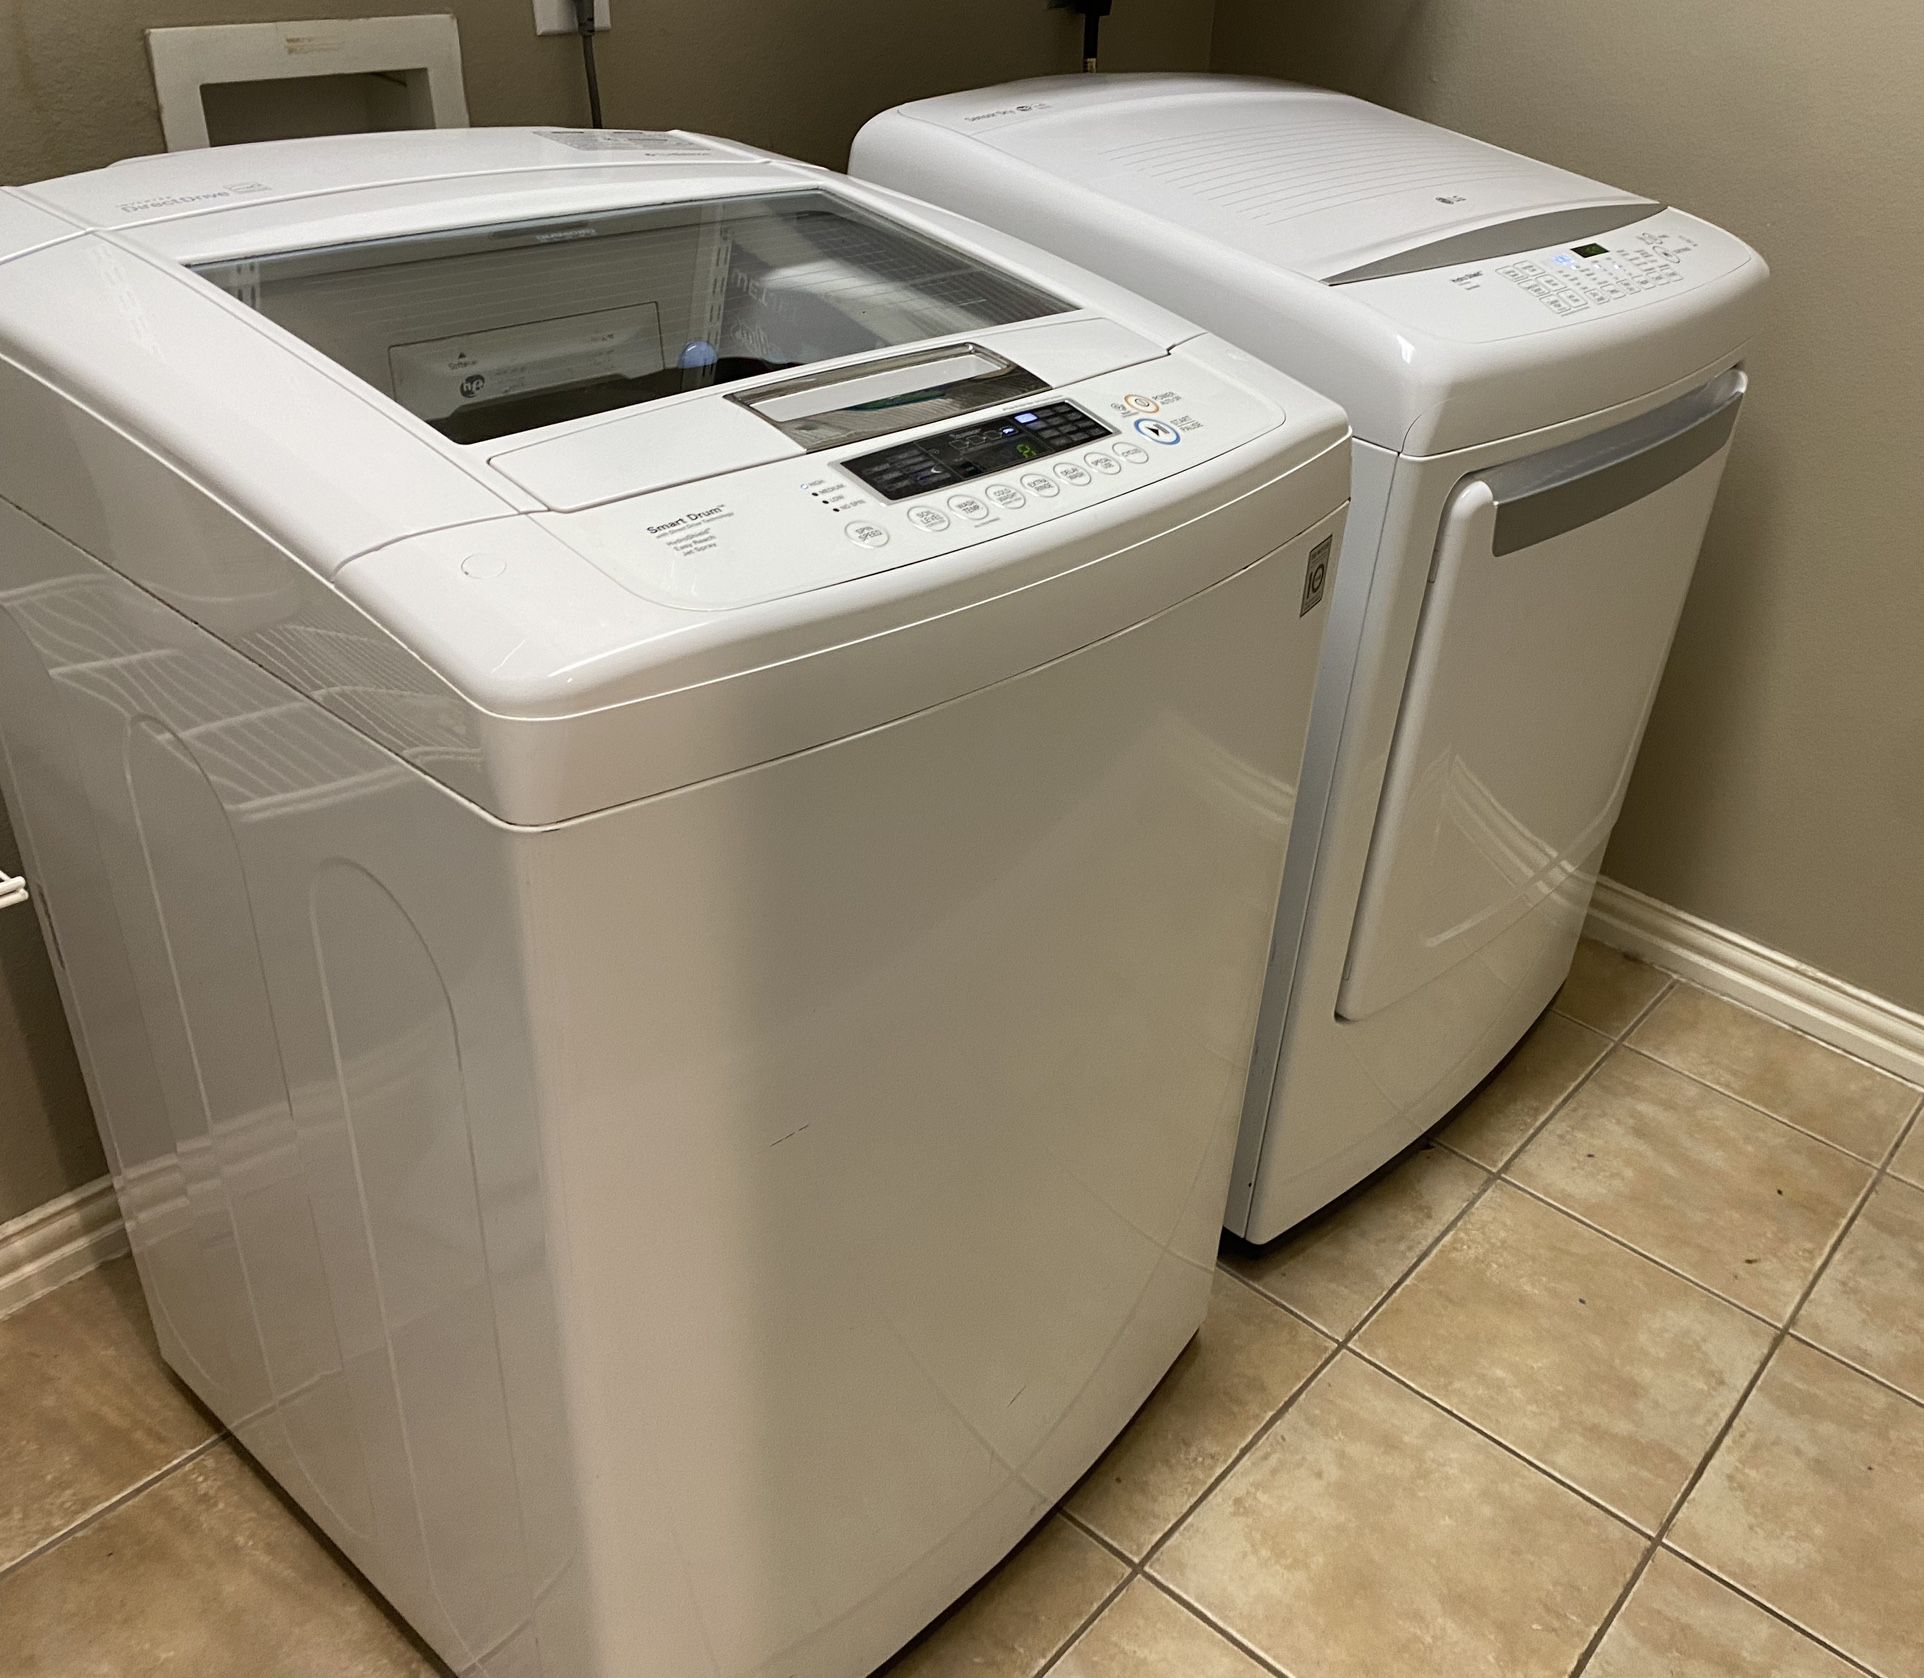 LG ULTRA CAPACITY Washer & Dryer Set w “Smart Diagnosis” in EXCELLENT CONDITION!!!